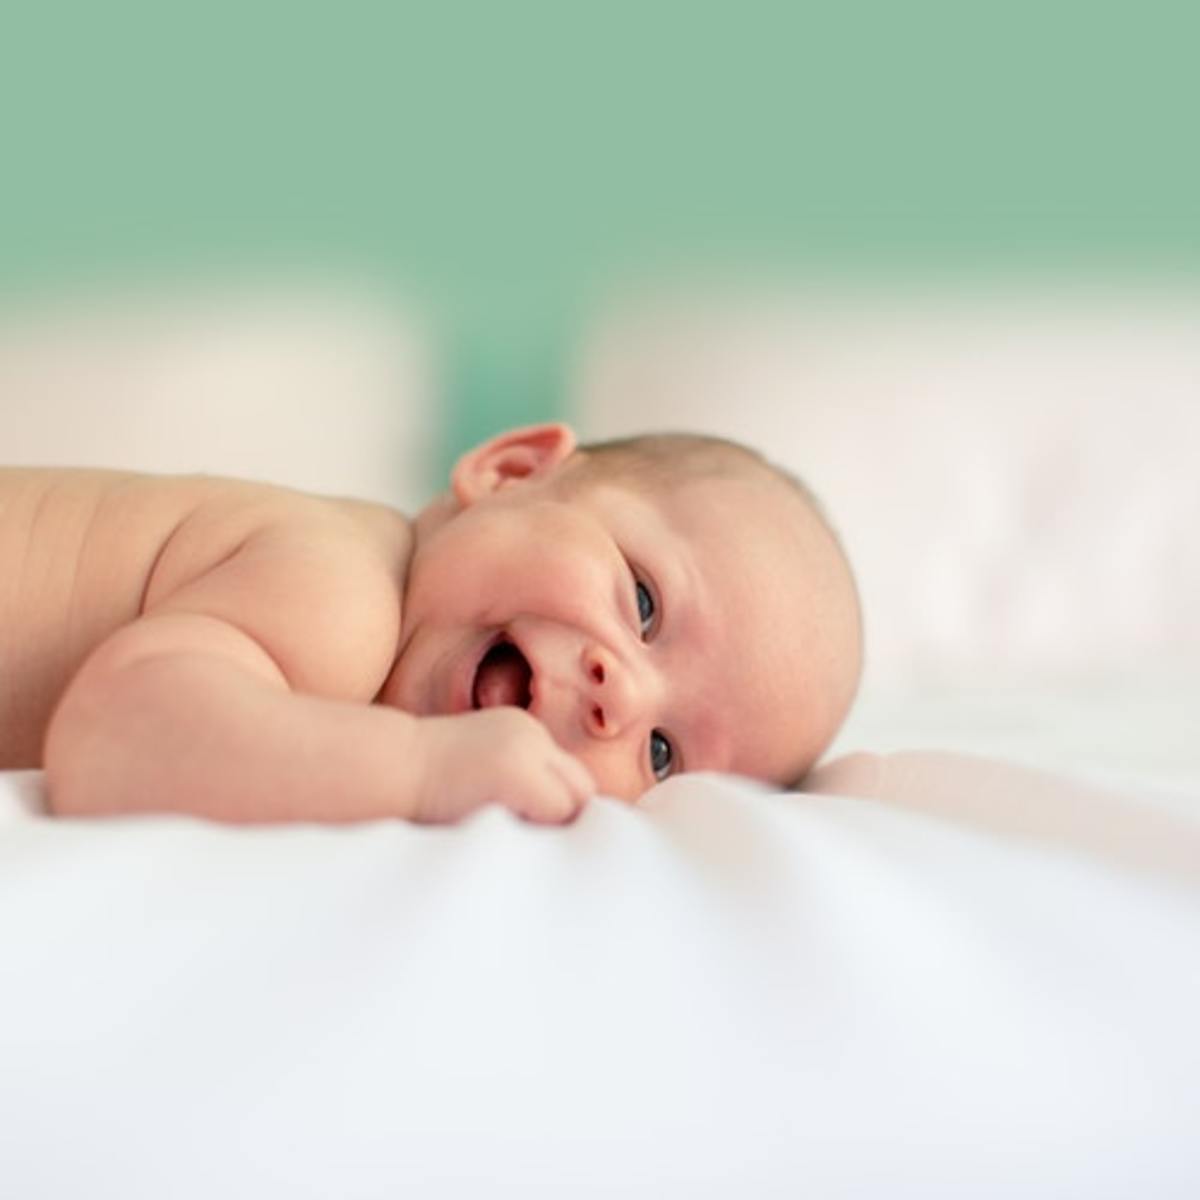 What You Should Know About Tummy Time for Your Baby